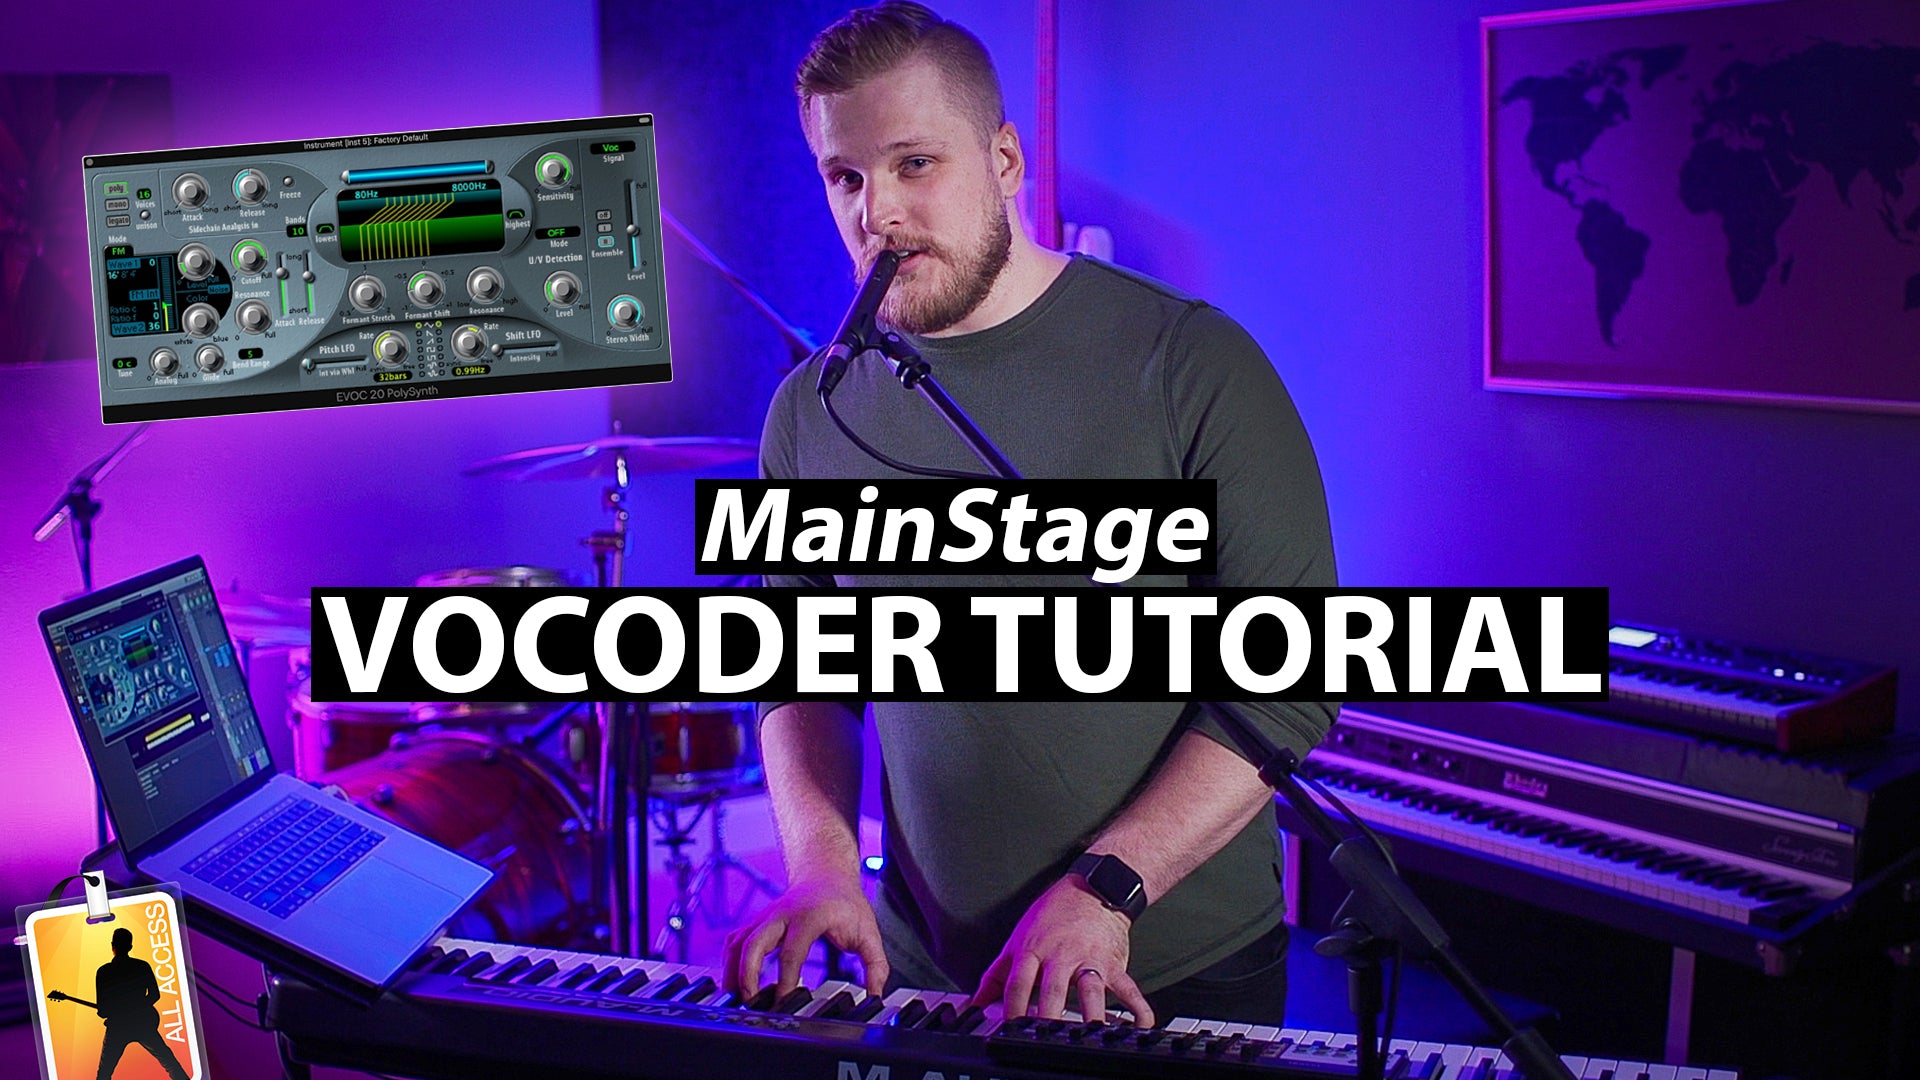 MainStage Tutorial: How to Use MainStage as a Vocoder